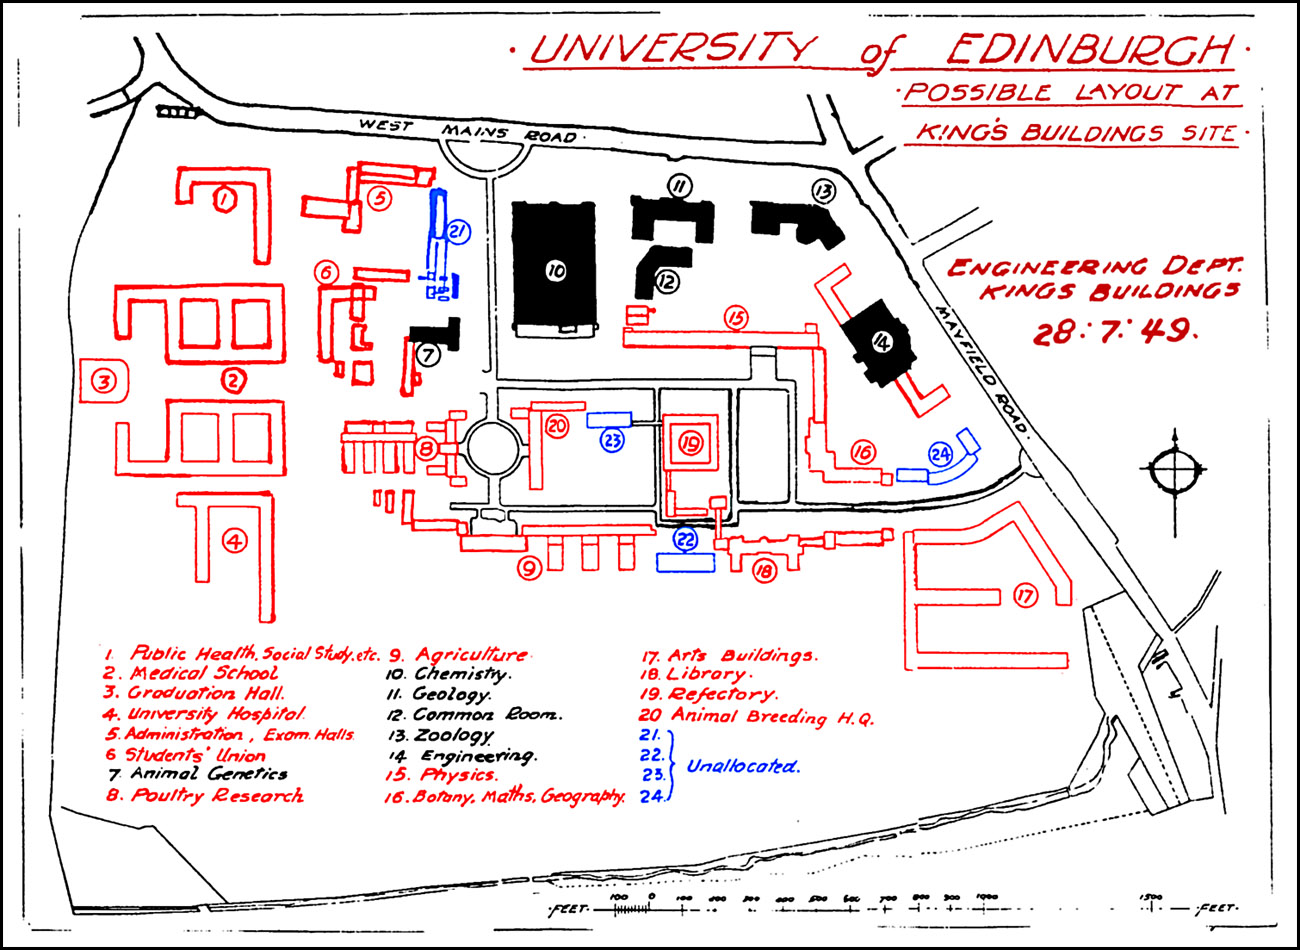 A 1949 diagram proposing the relocation of the entire University to the King's Buildings campus